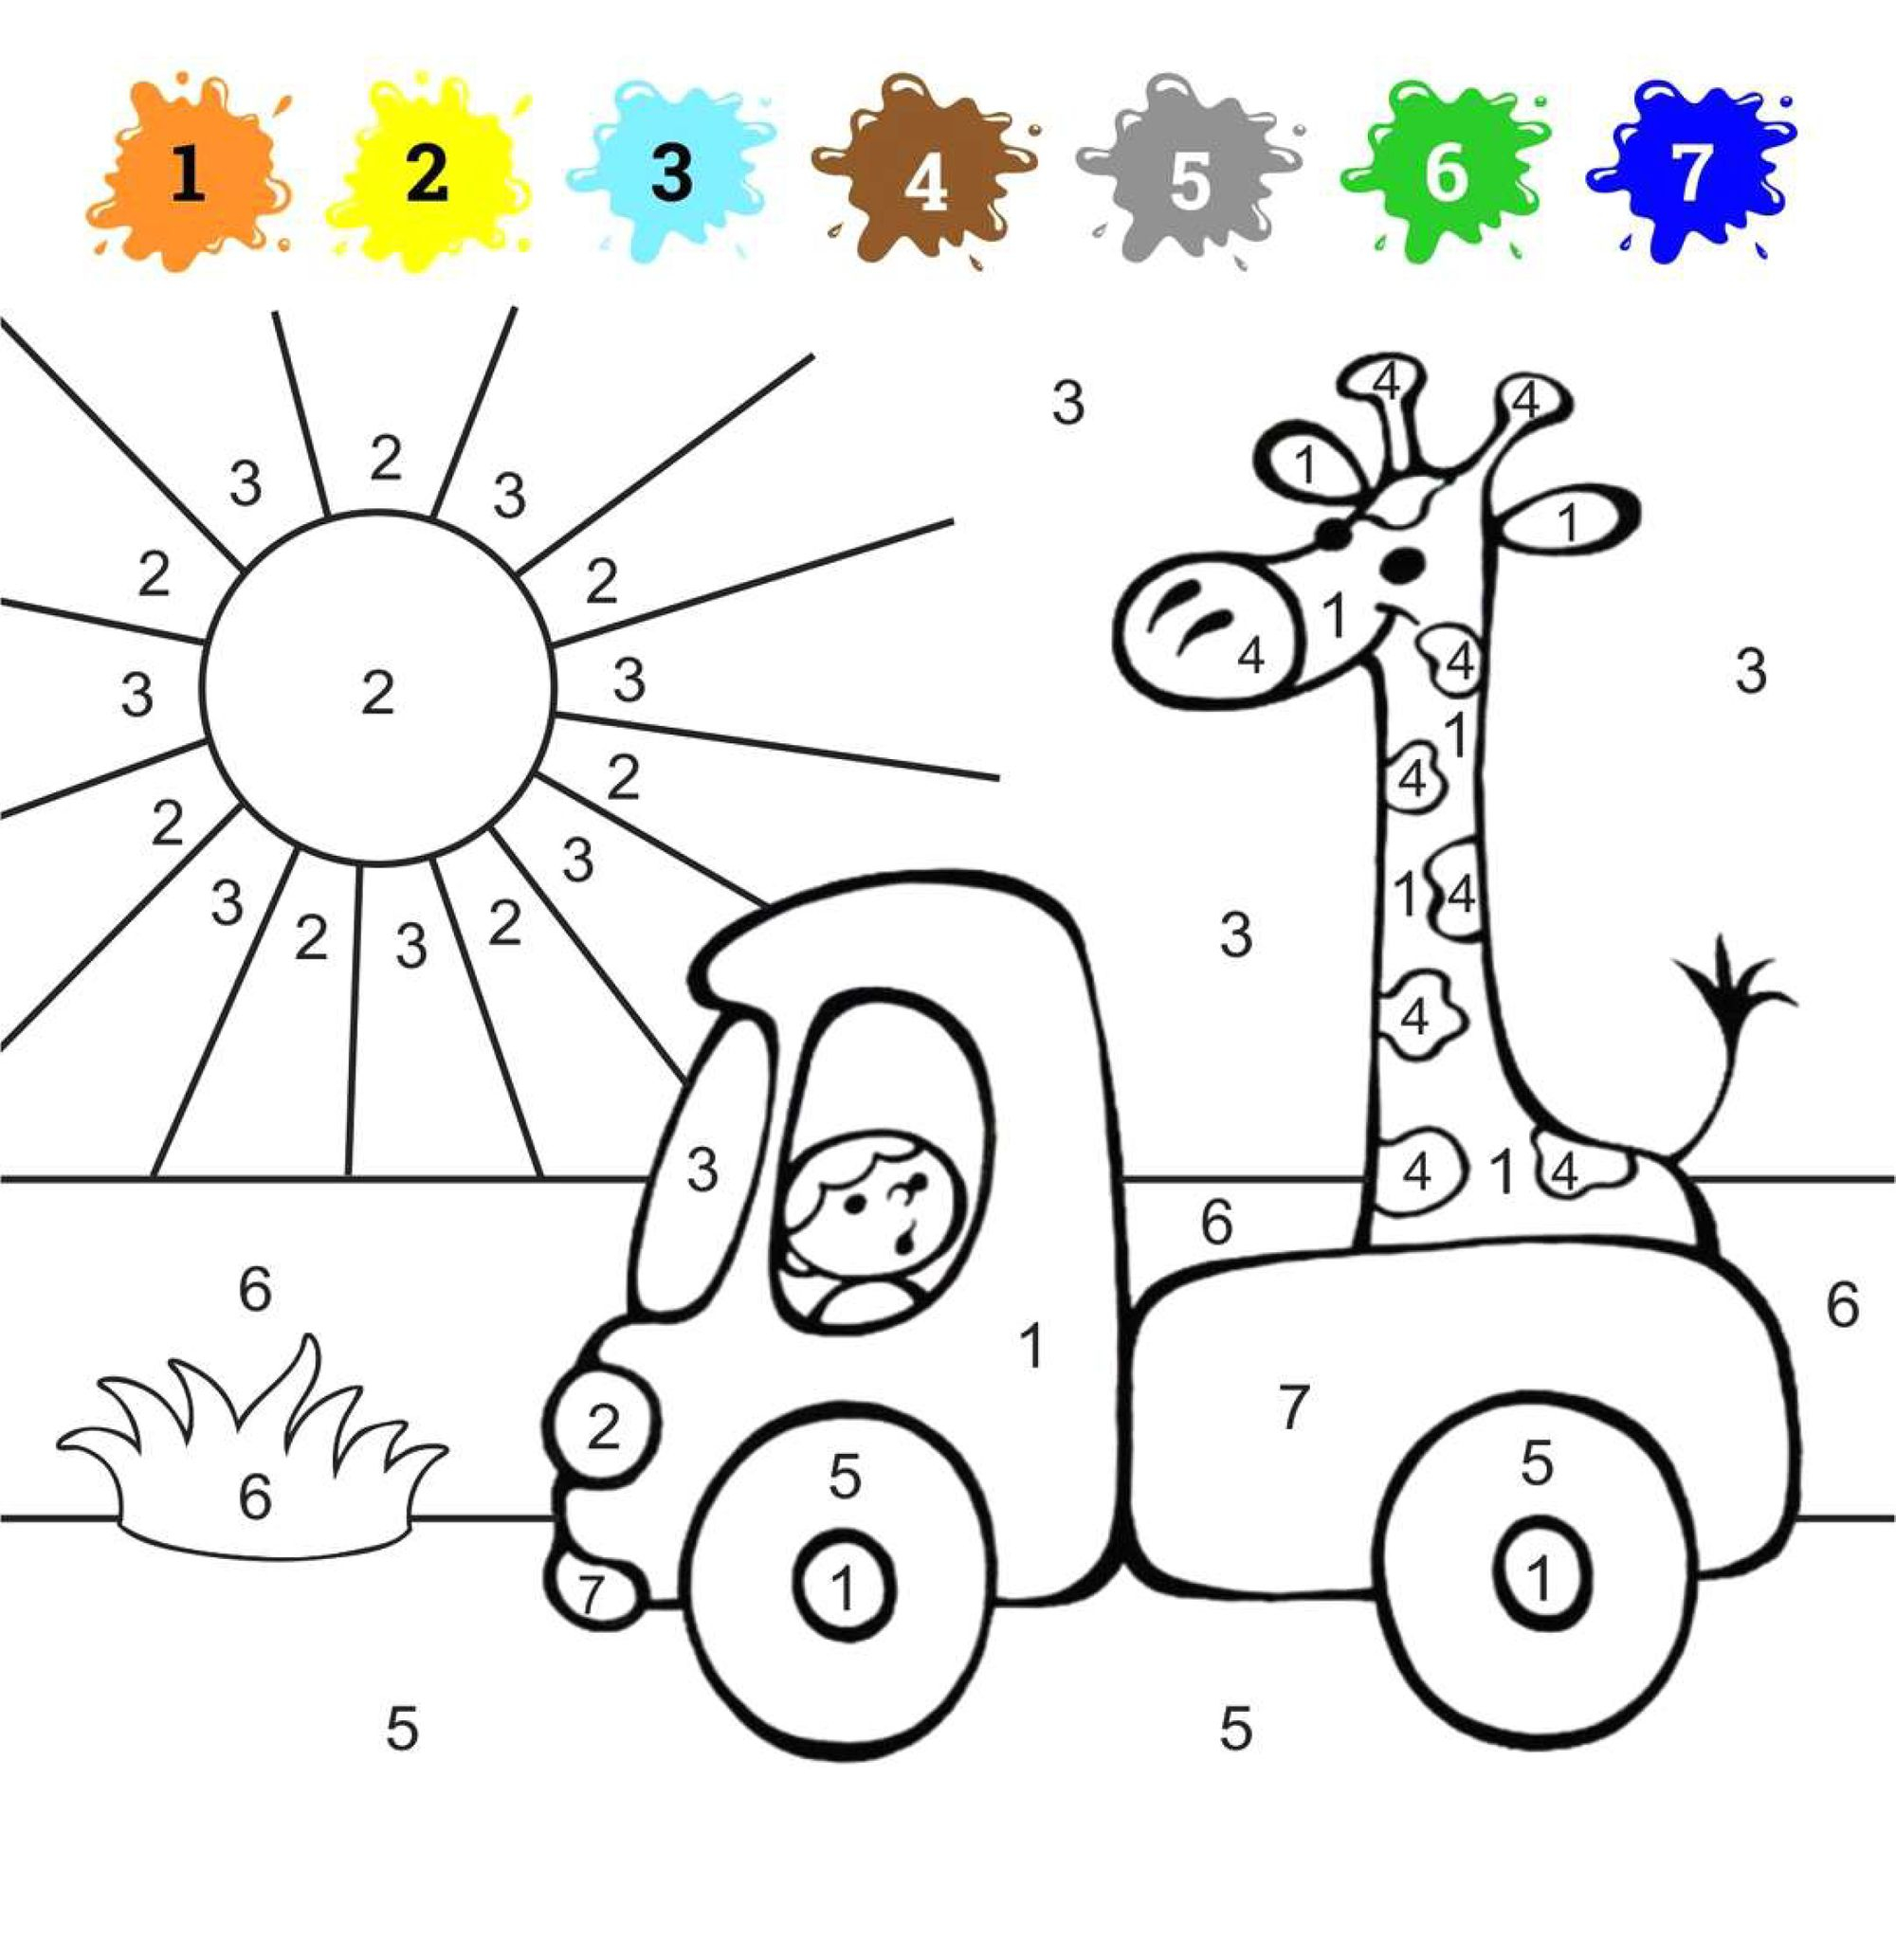 Coloring By Numbers For Children